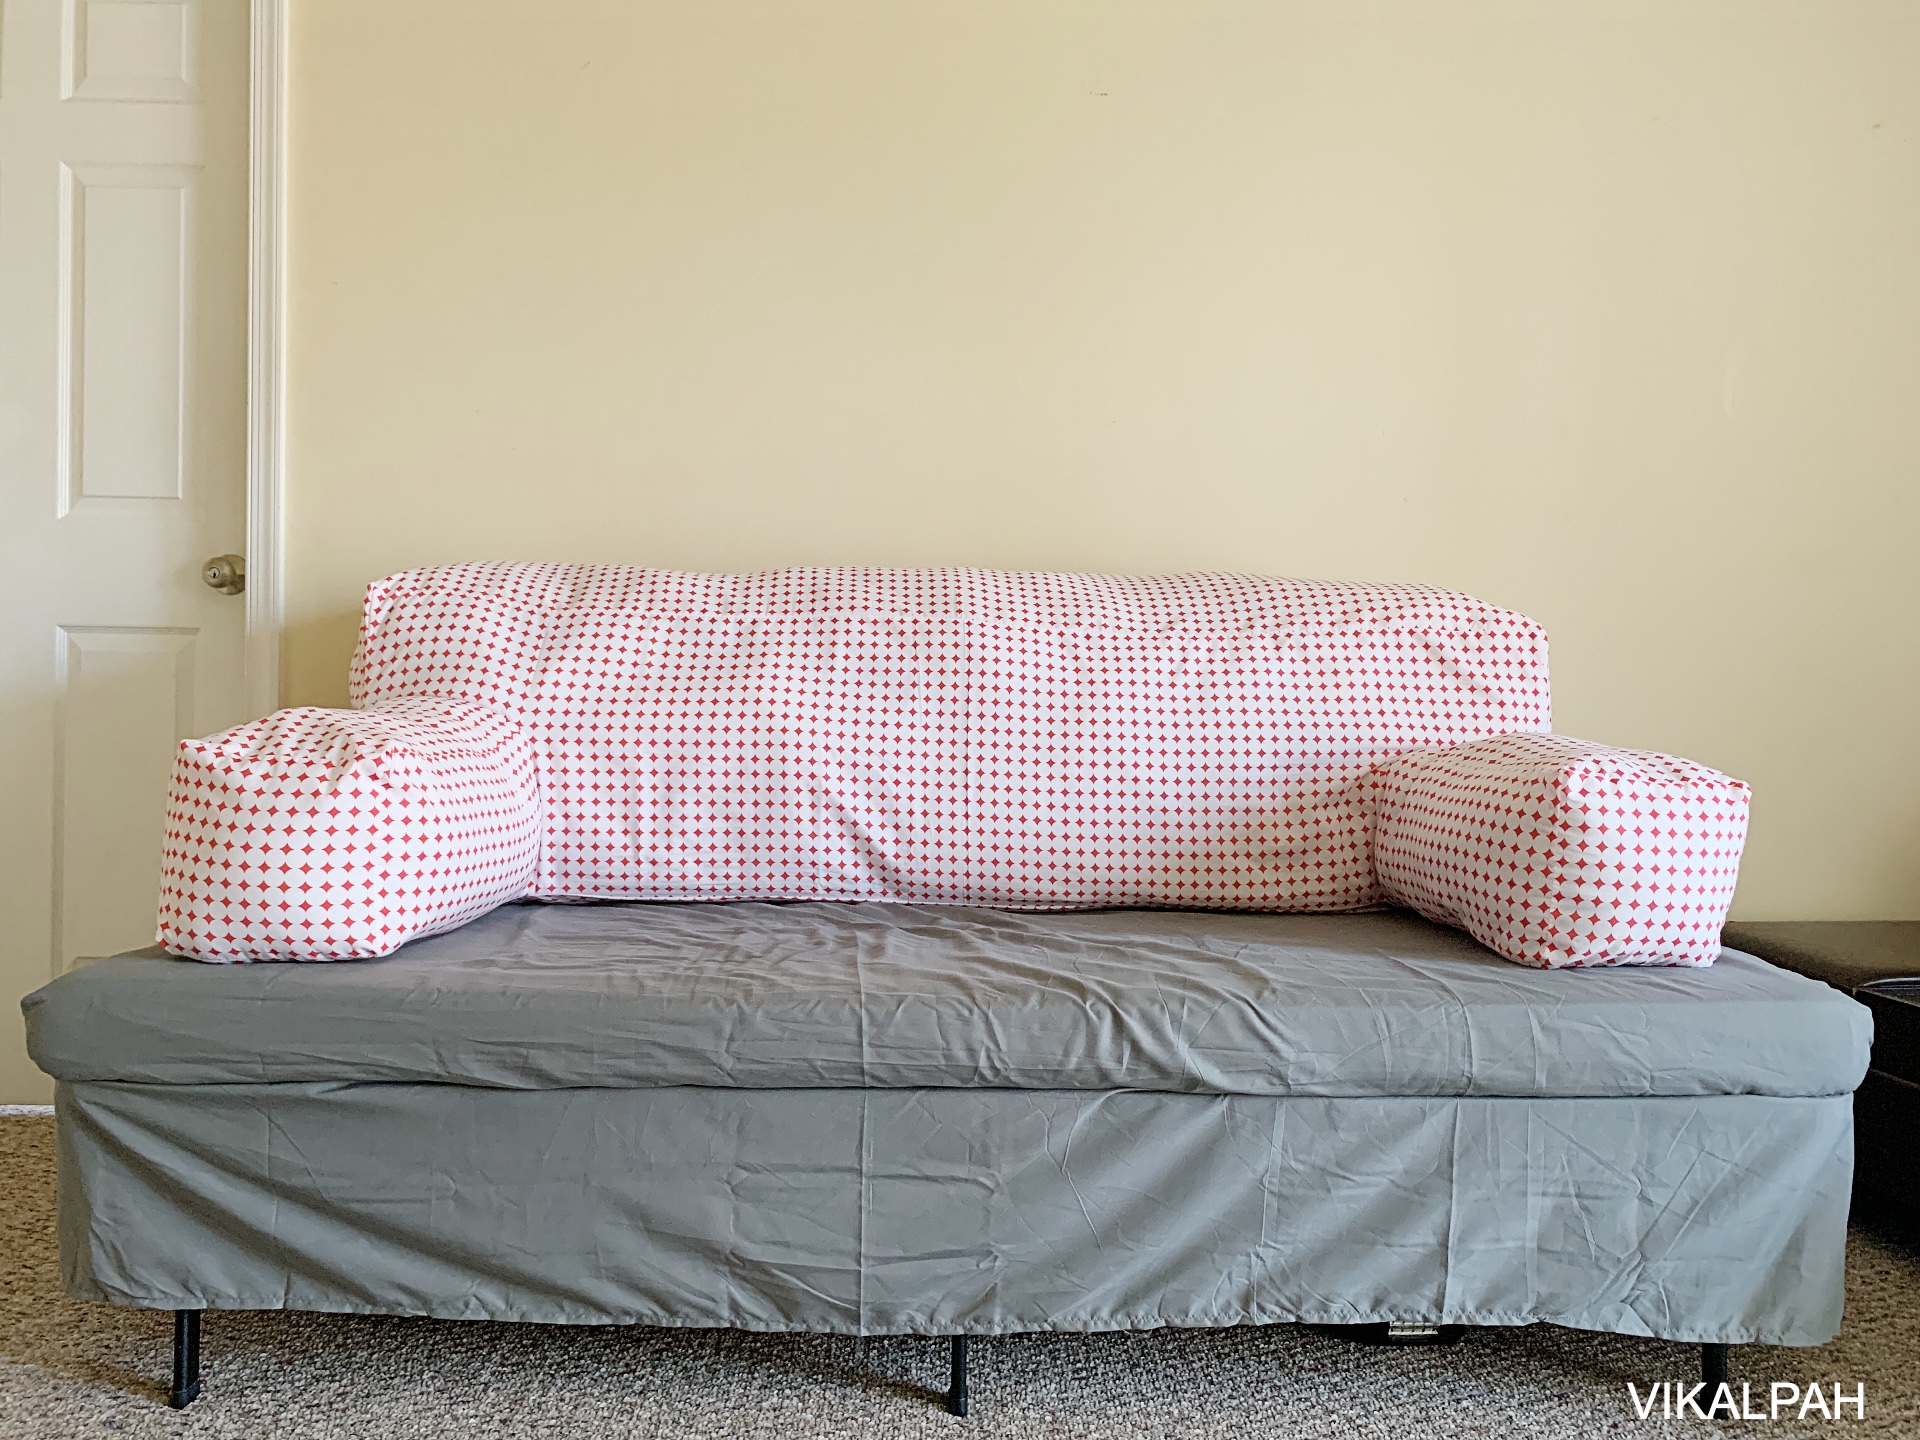 Twin Bed Into A Couch Diy Cover, How To Make Two Twin Beds Into A Couch